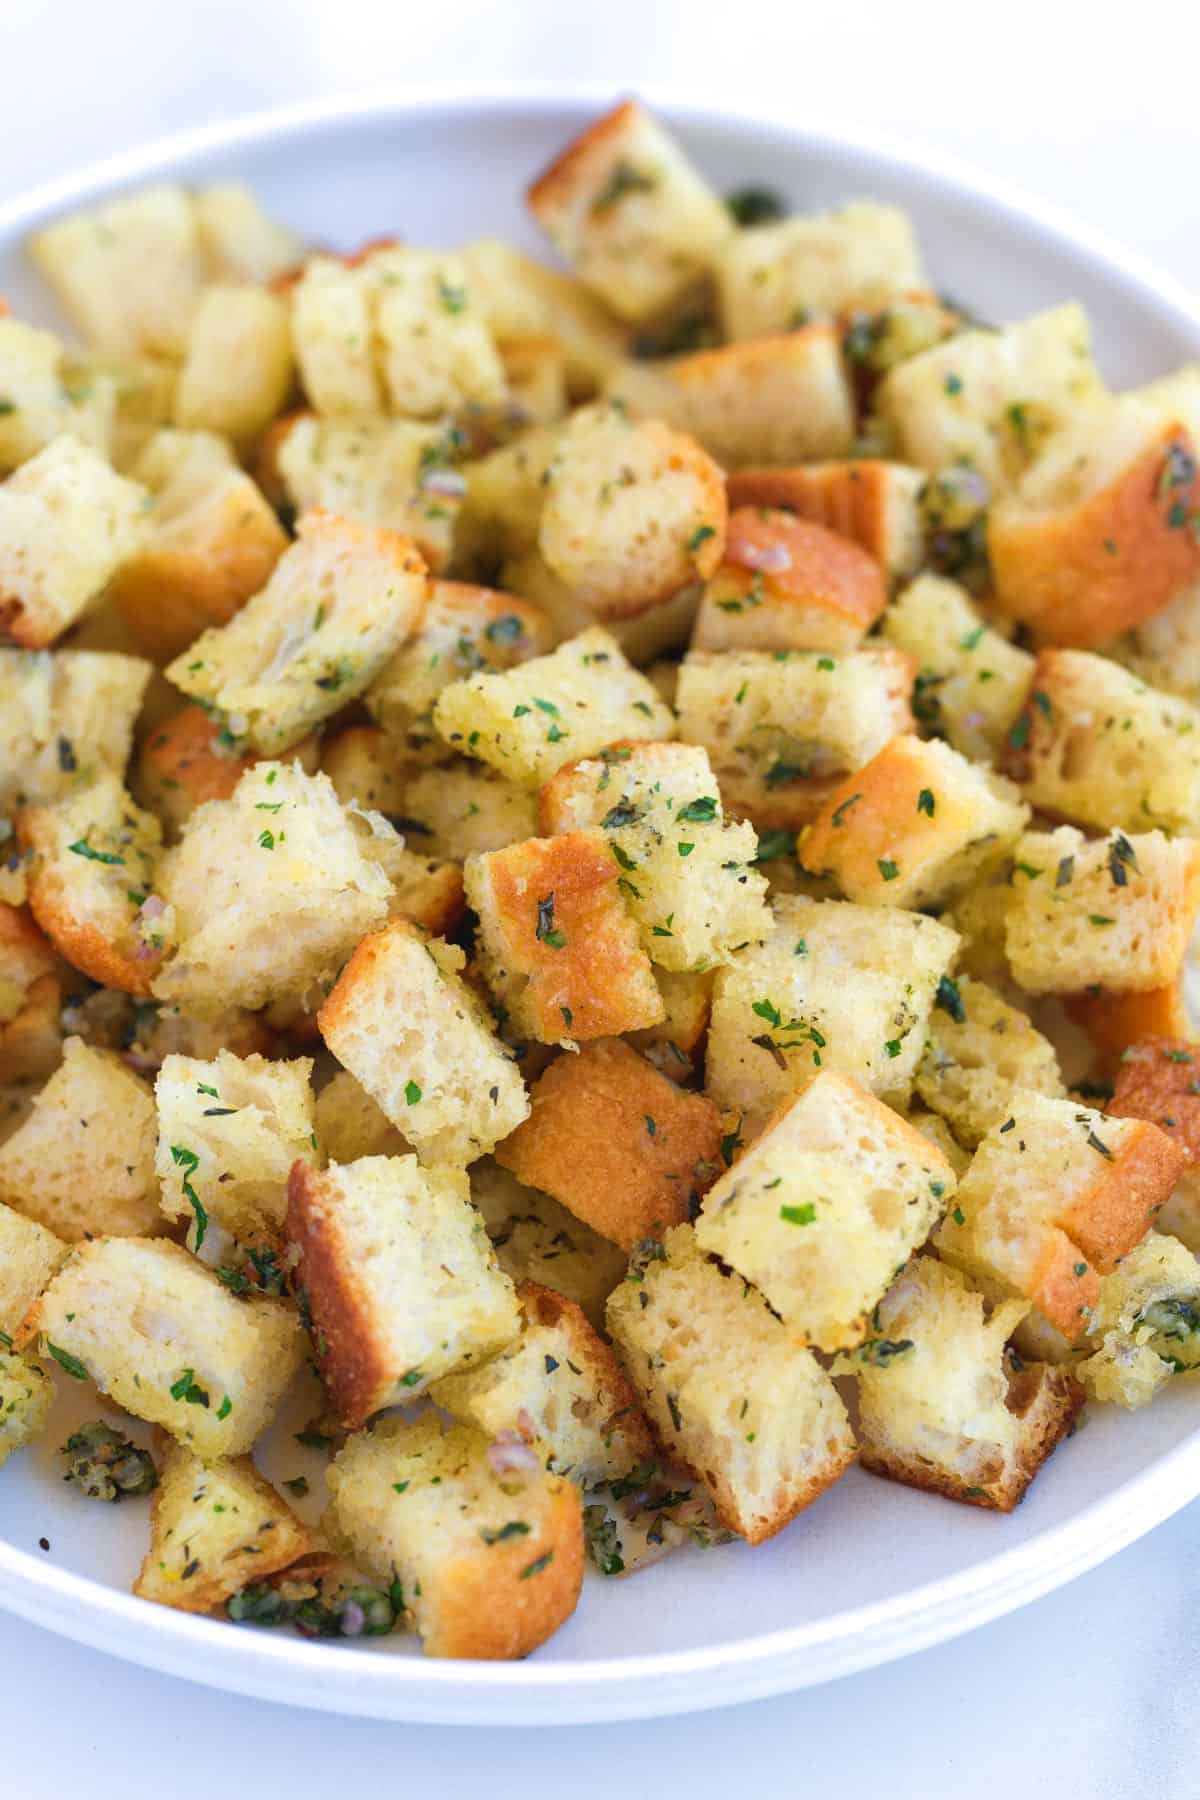 Perfect homemade croutons with garlic and herbs